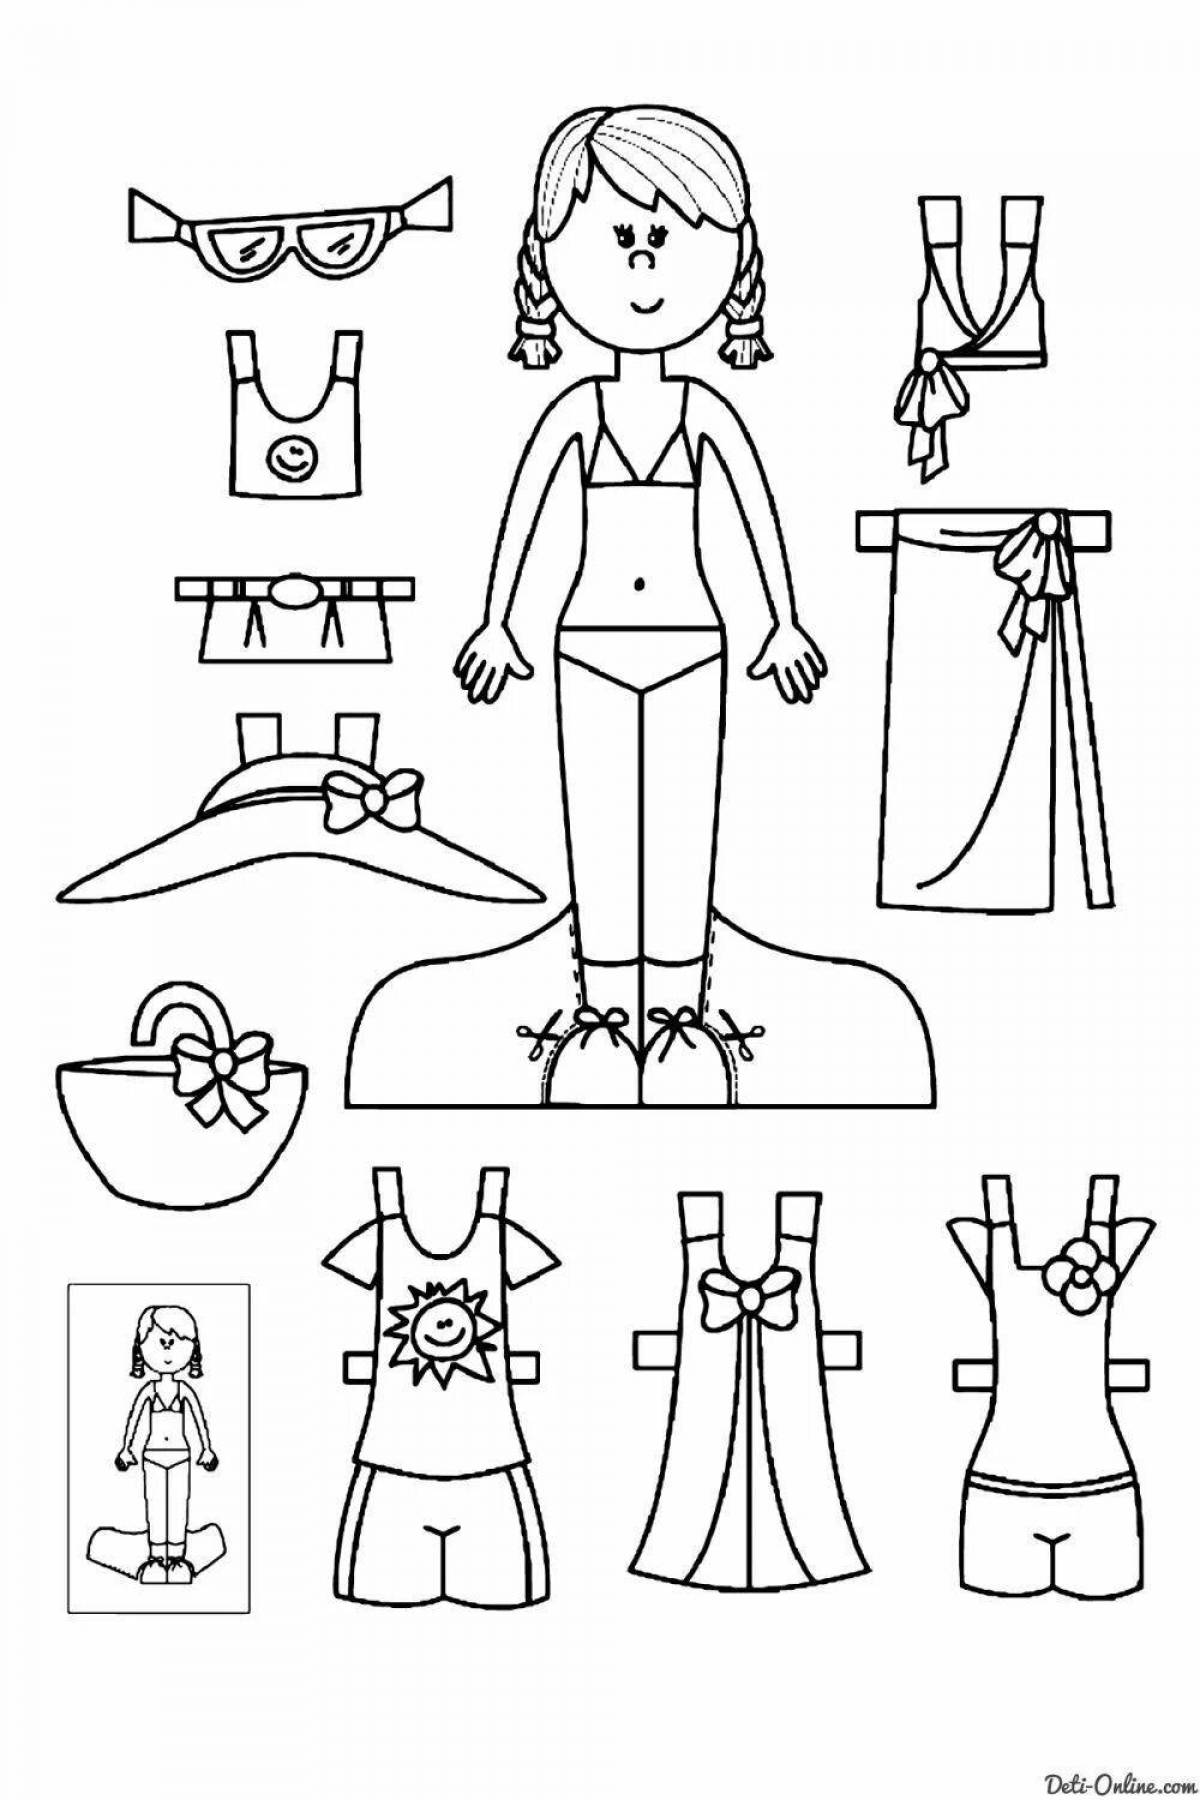 Coloring pages for girls in amazing dresses